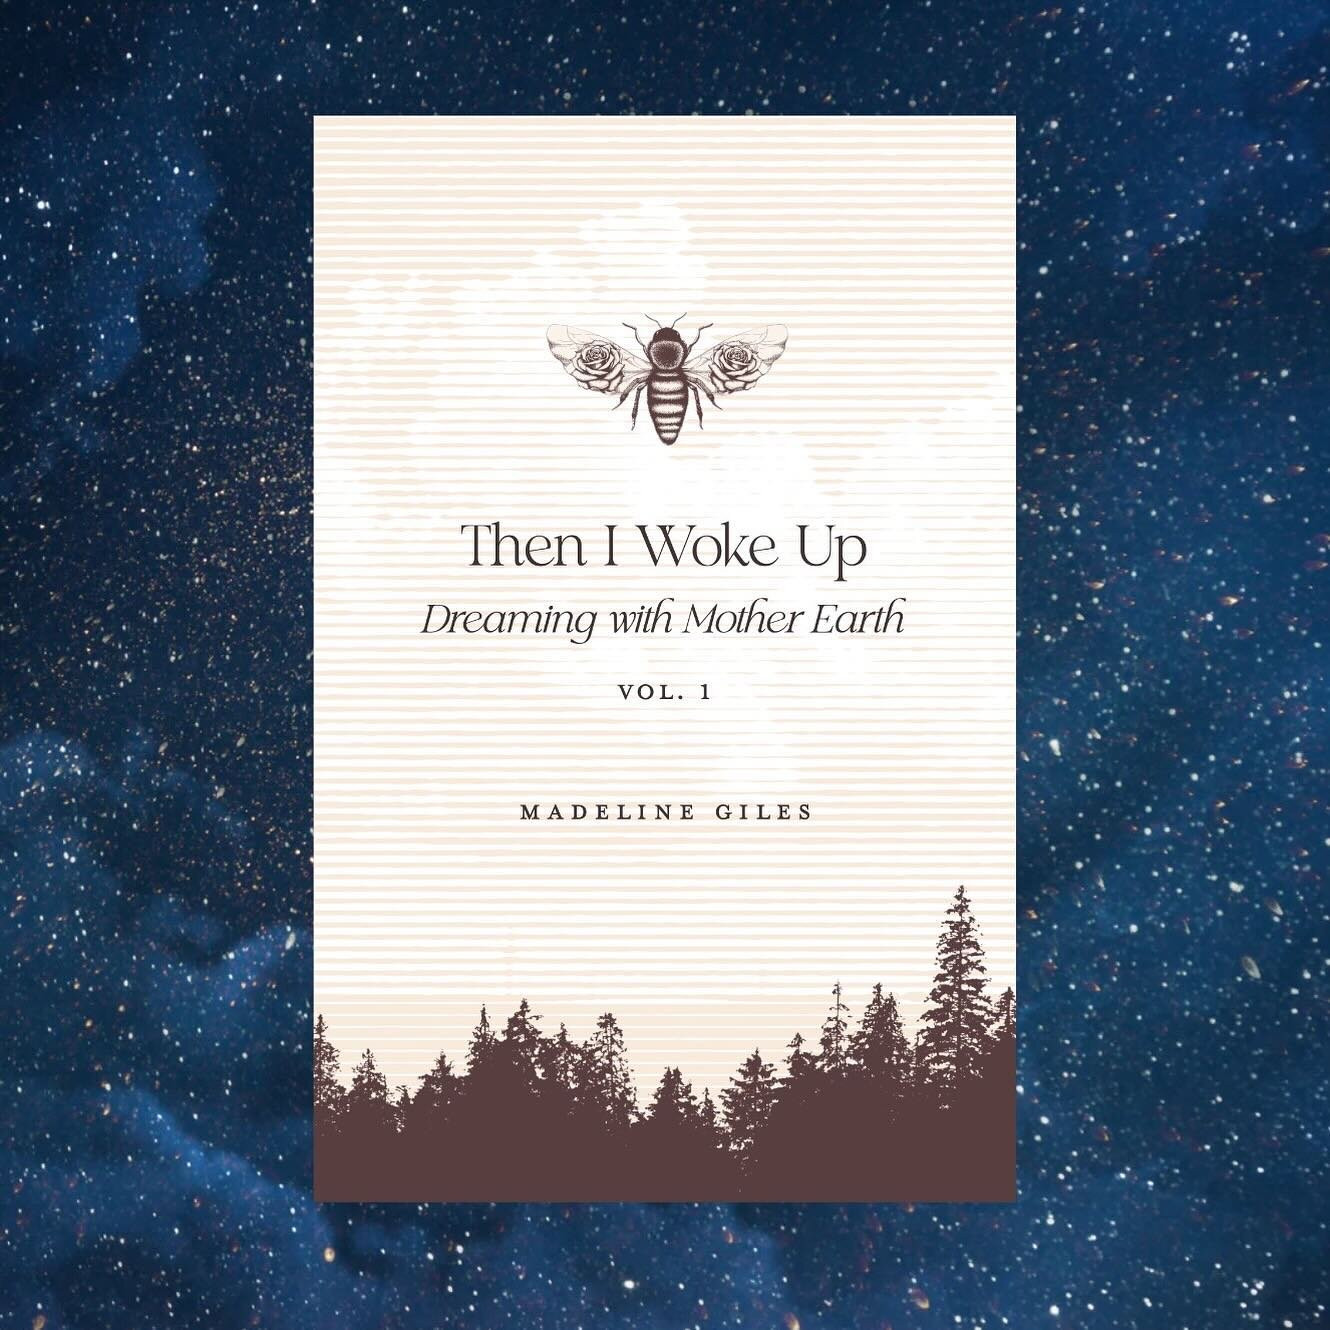 Cover reveal for my bedside booklet coming out soon🌬️🕊️🐚🪷&quot;Then I Woke Up: Dreaming with Mother Earth&quot; shares about intentional dreaming and features a series of six dreams I've received over the past few years. Can't wait to witness her